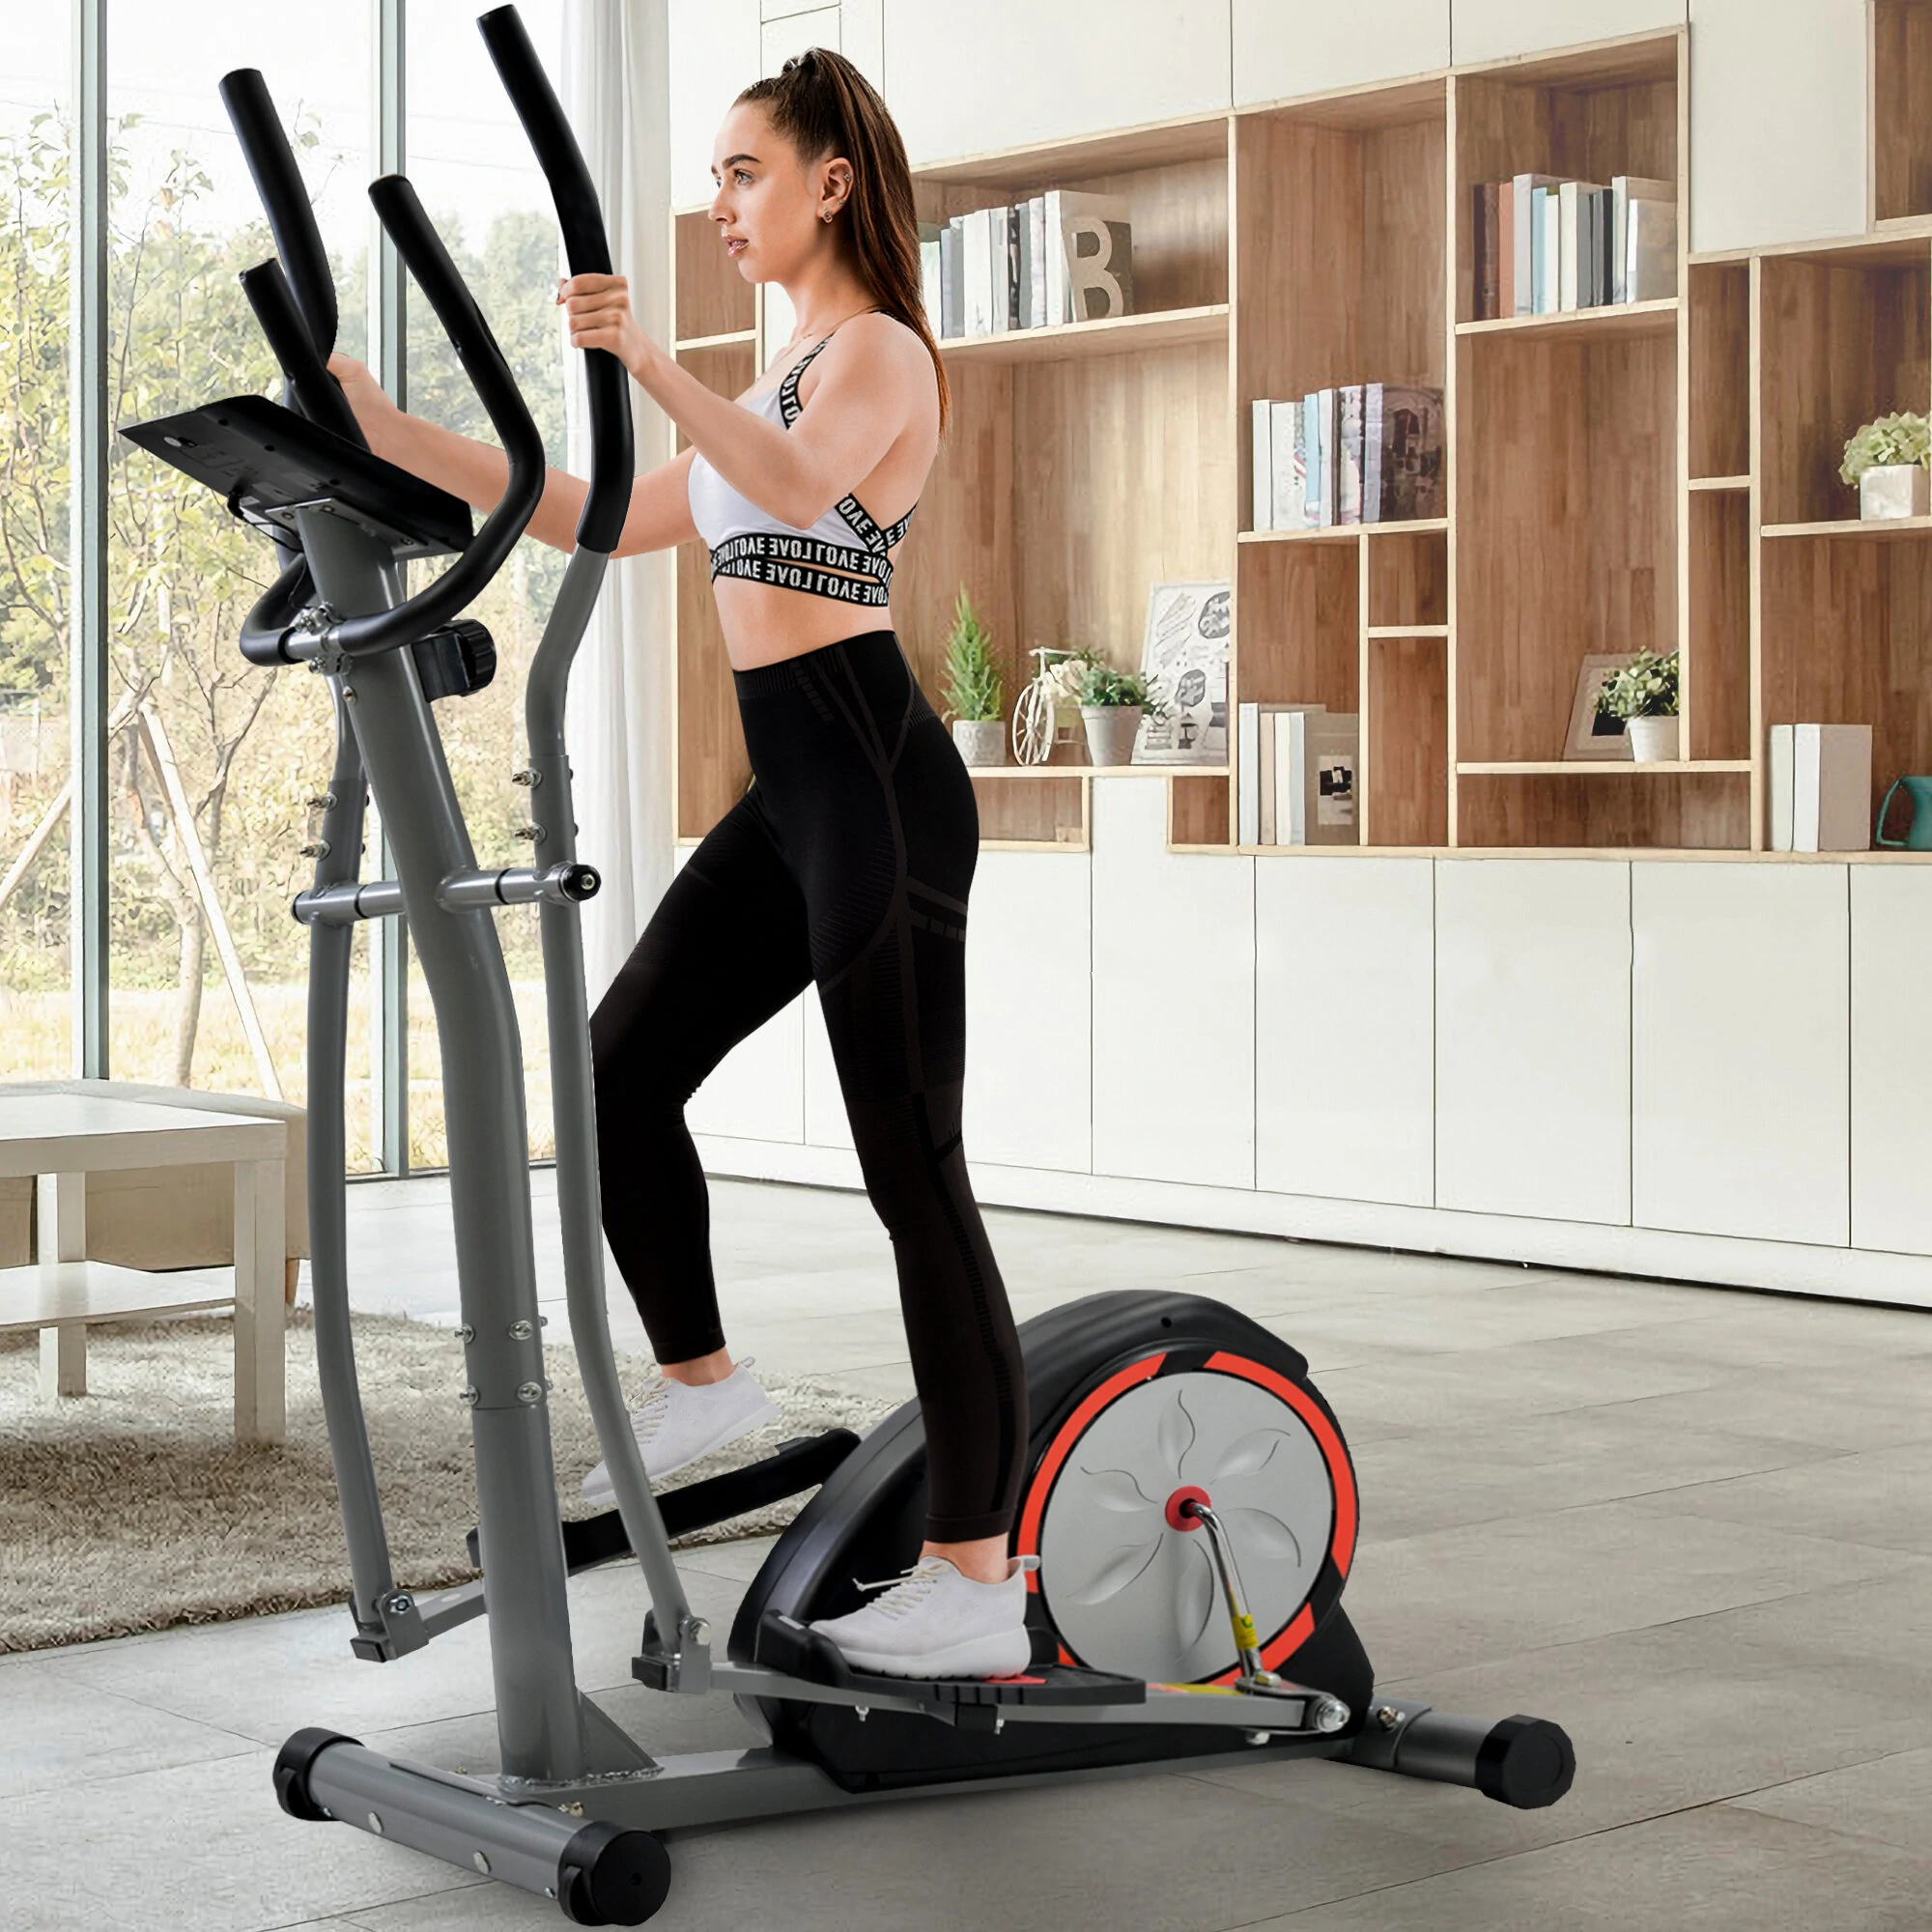 Bominfit Exercise Bike 5KG Flywheel 8 Levels of Magnetic Resistance Silent Portable Movable Bicycle Home Exercise Aerobic Training Indoor Cycling Bike